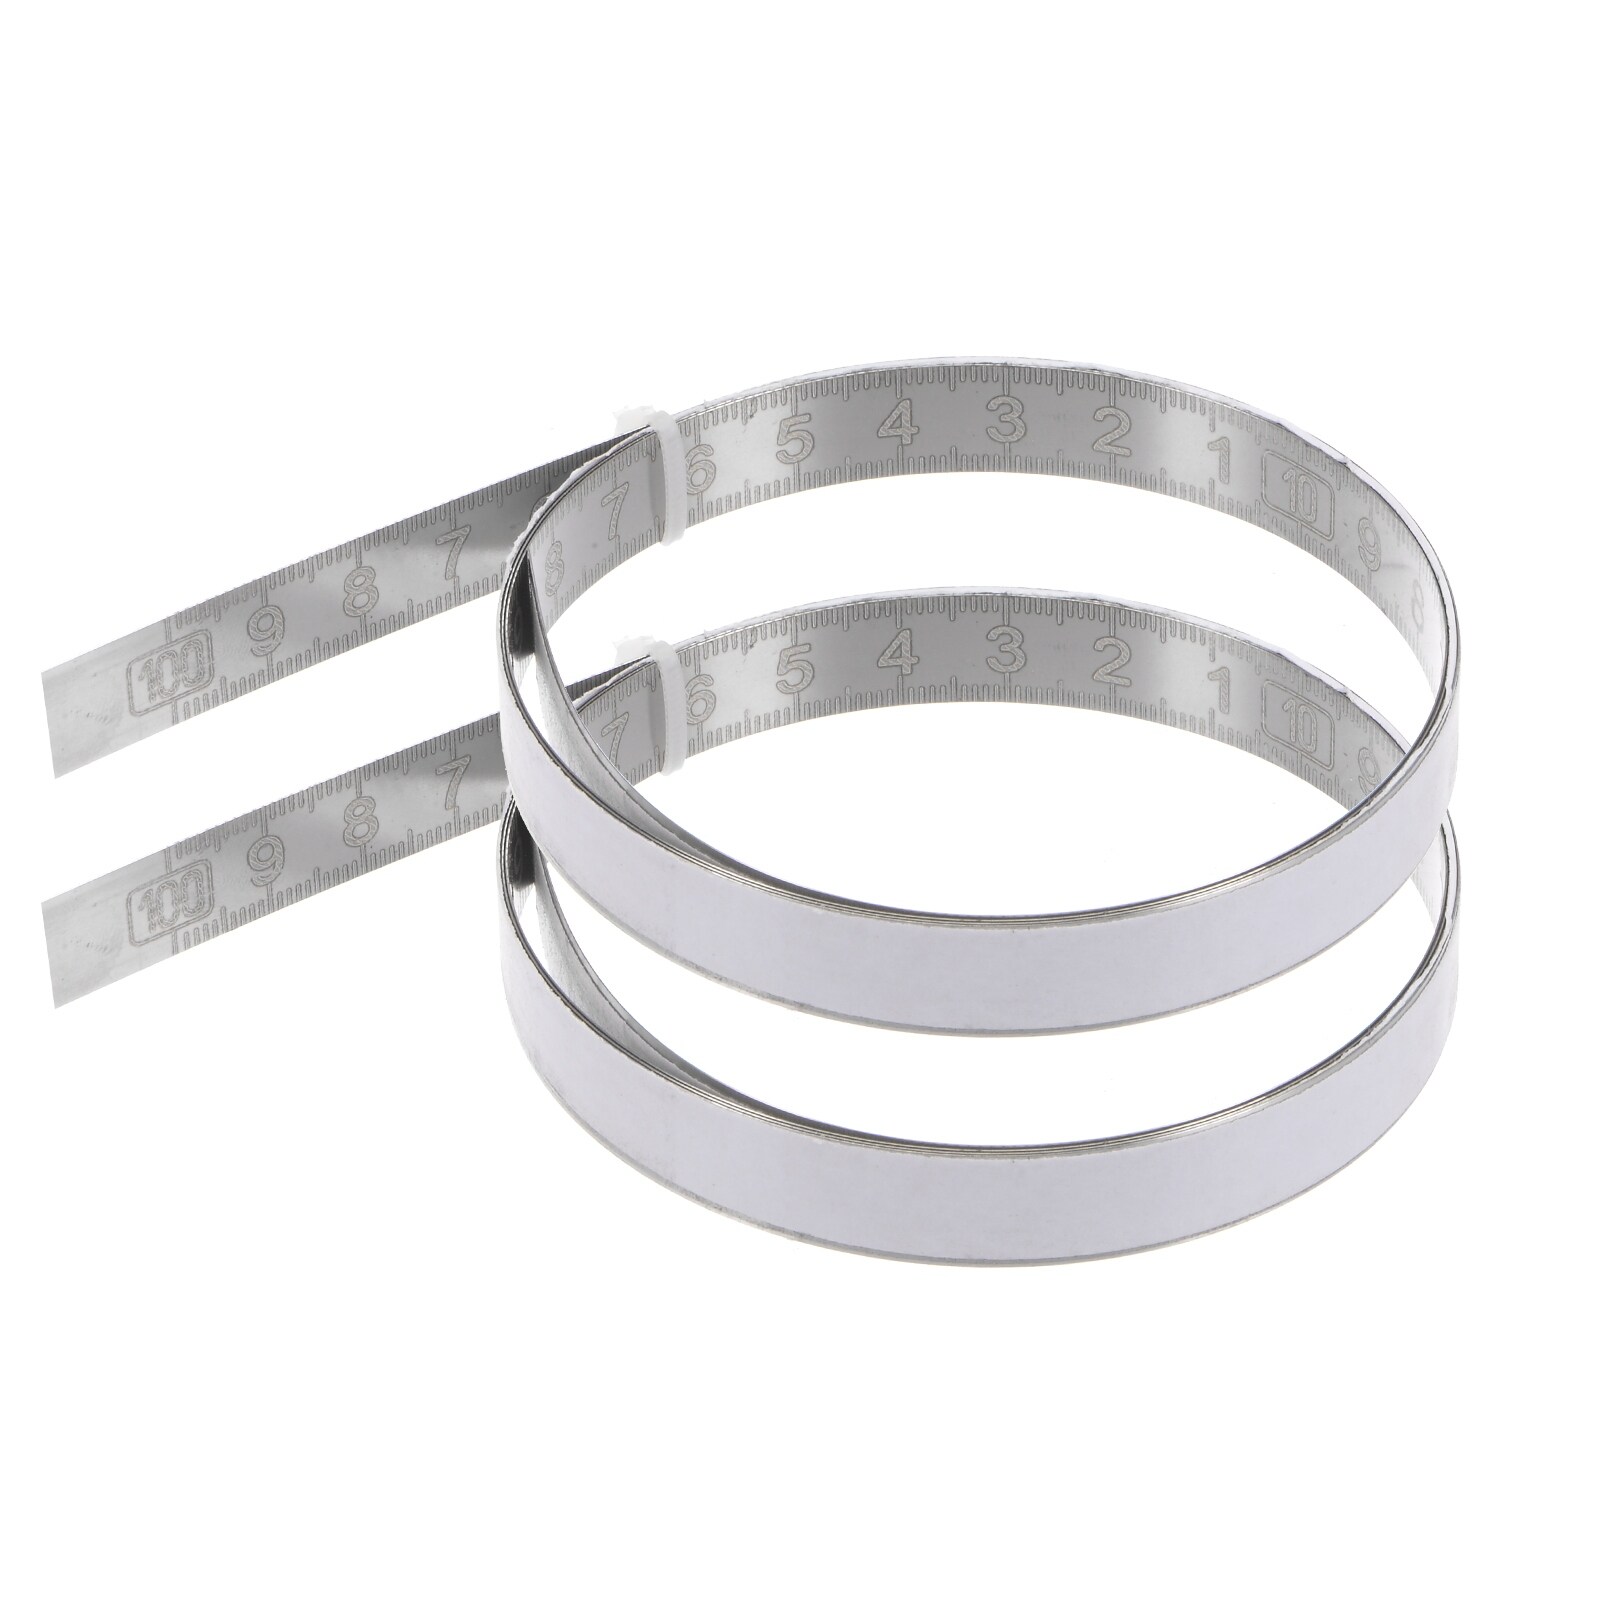 Self-Adhesive Measuring Tape 100cm Stainless Steel Metric Right to